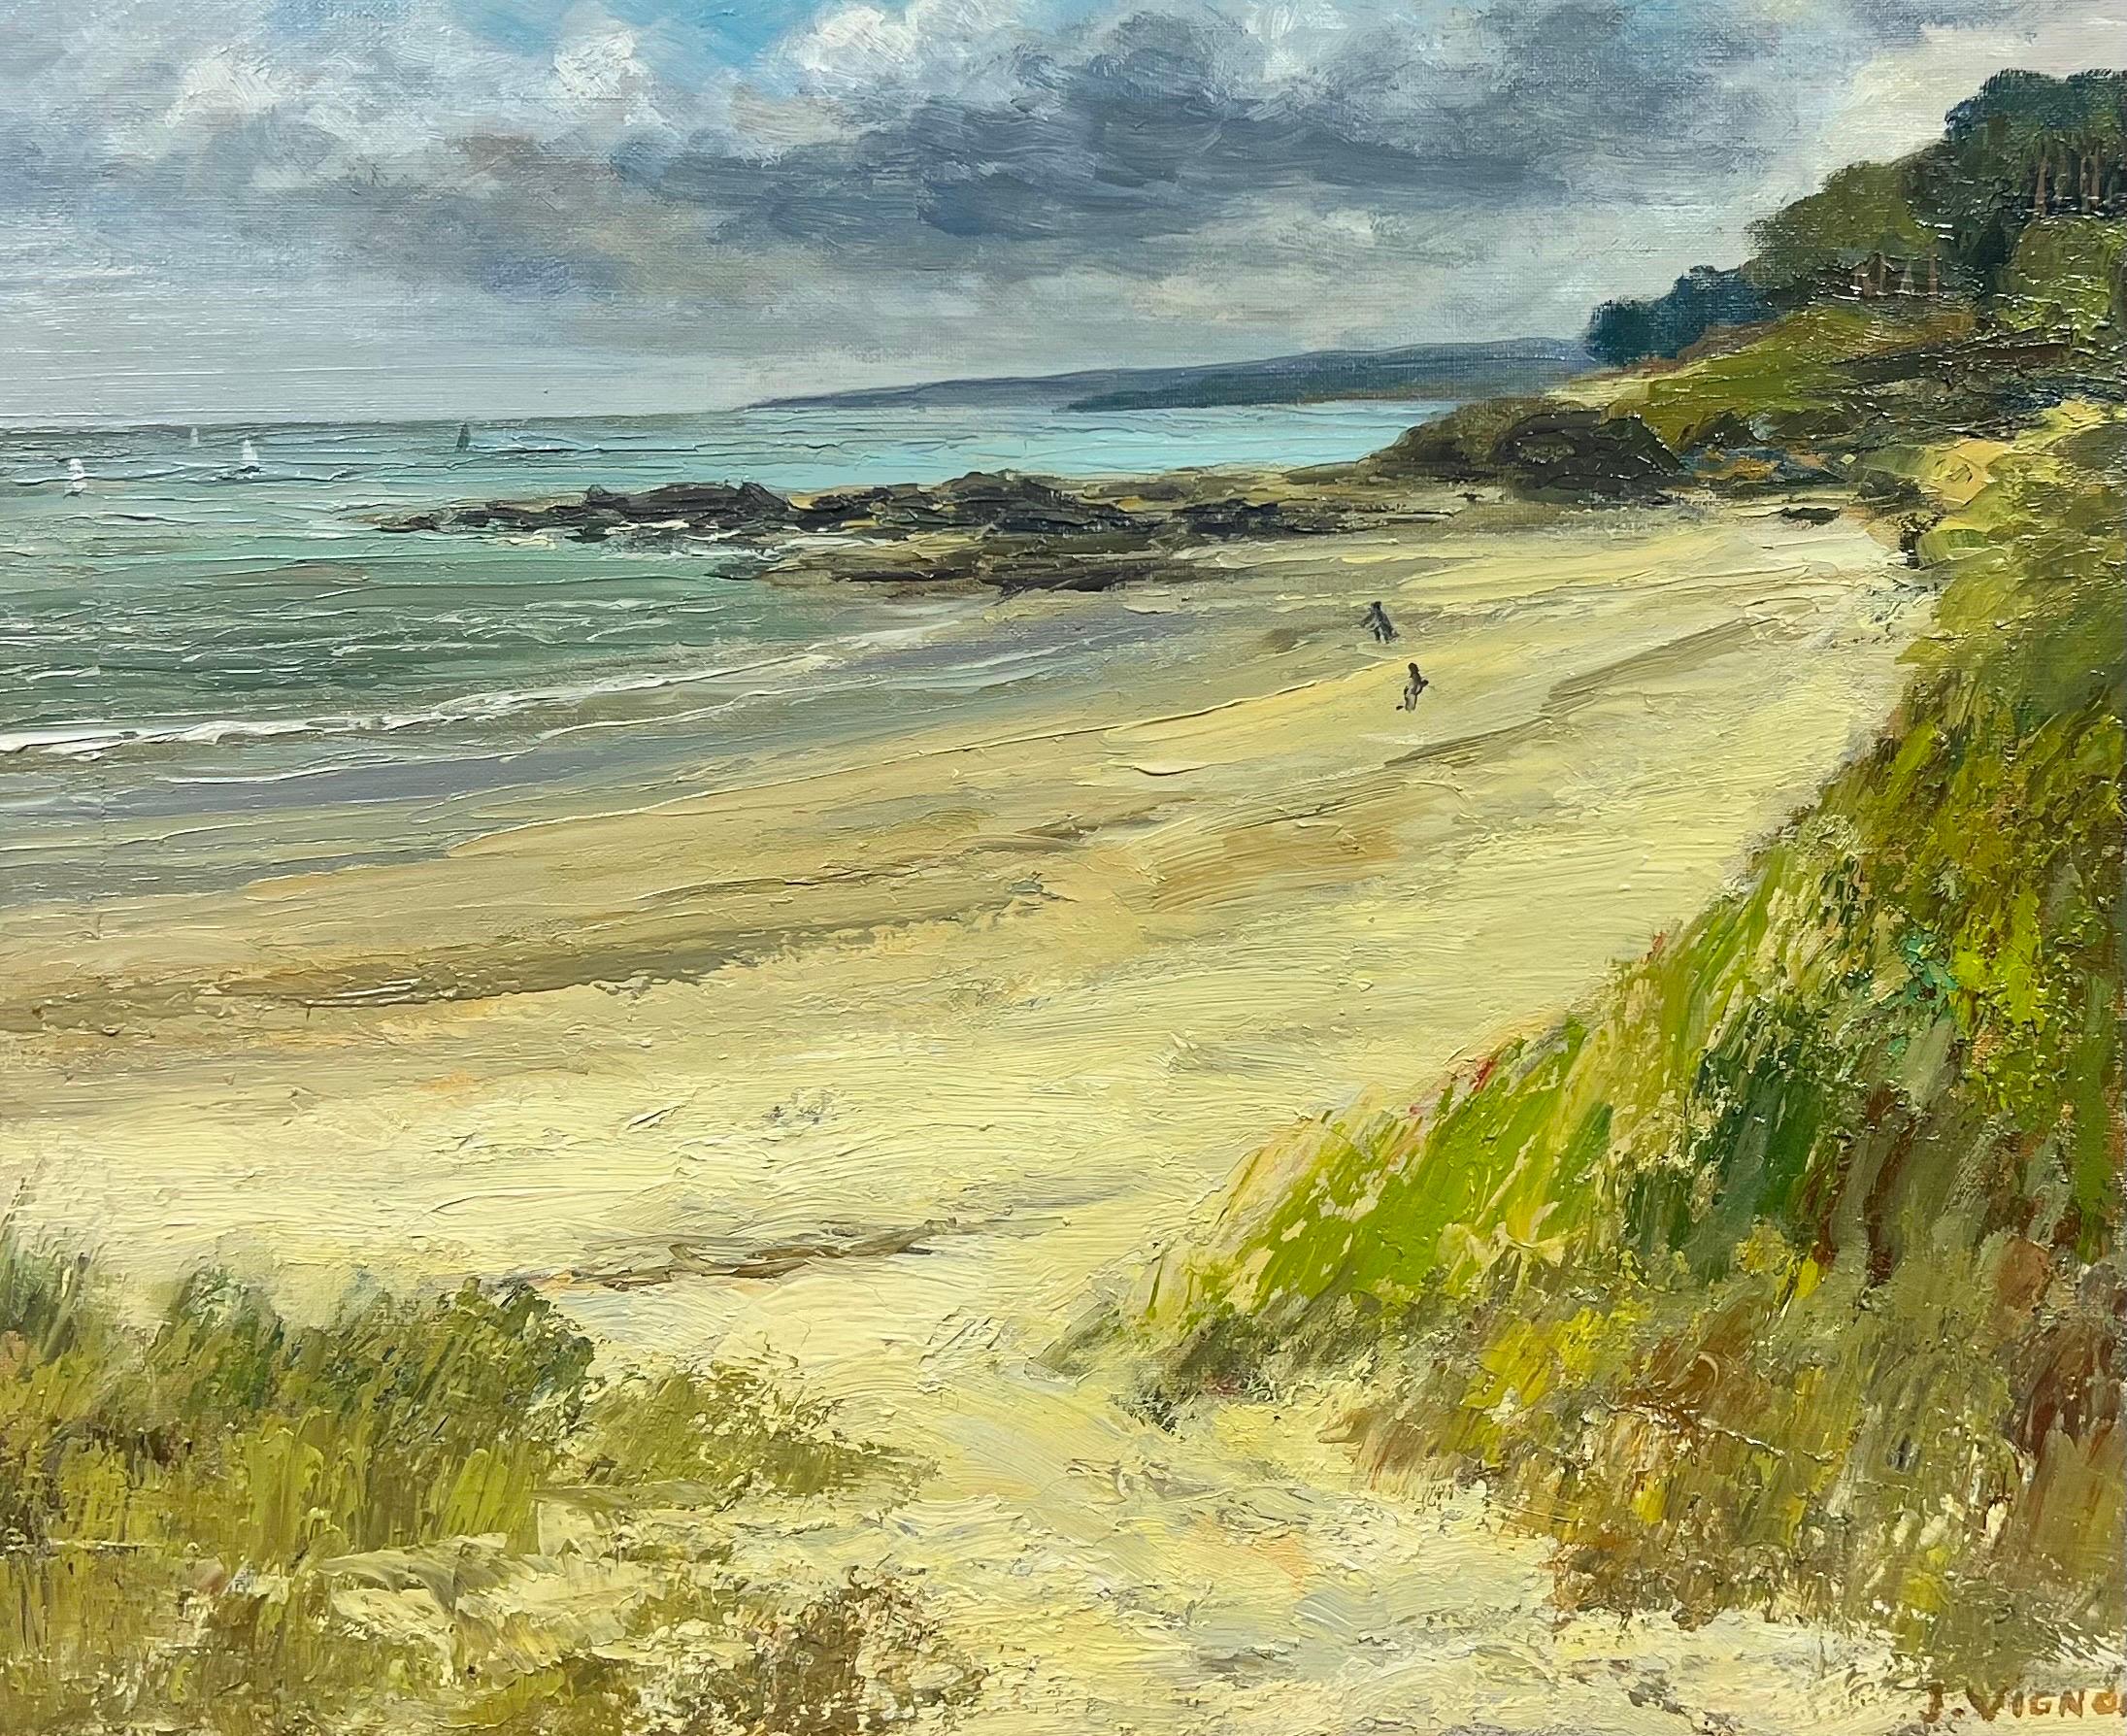 Beach Scene
by Josine Vignon (French 1922-2022) 
oil painting on canvas, framed
framed: 21 x 24.5 inches
canvas: 15 x 18 inches
very good condition 
provenance: from the artists estate, France

Josine Vignon (1922-2022) was a French artist living on